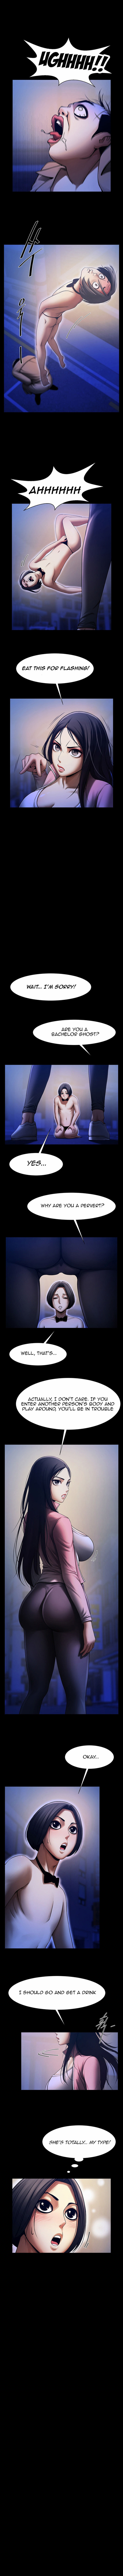 The Woman Who Lives In My Room - Chapter 9 Page 3